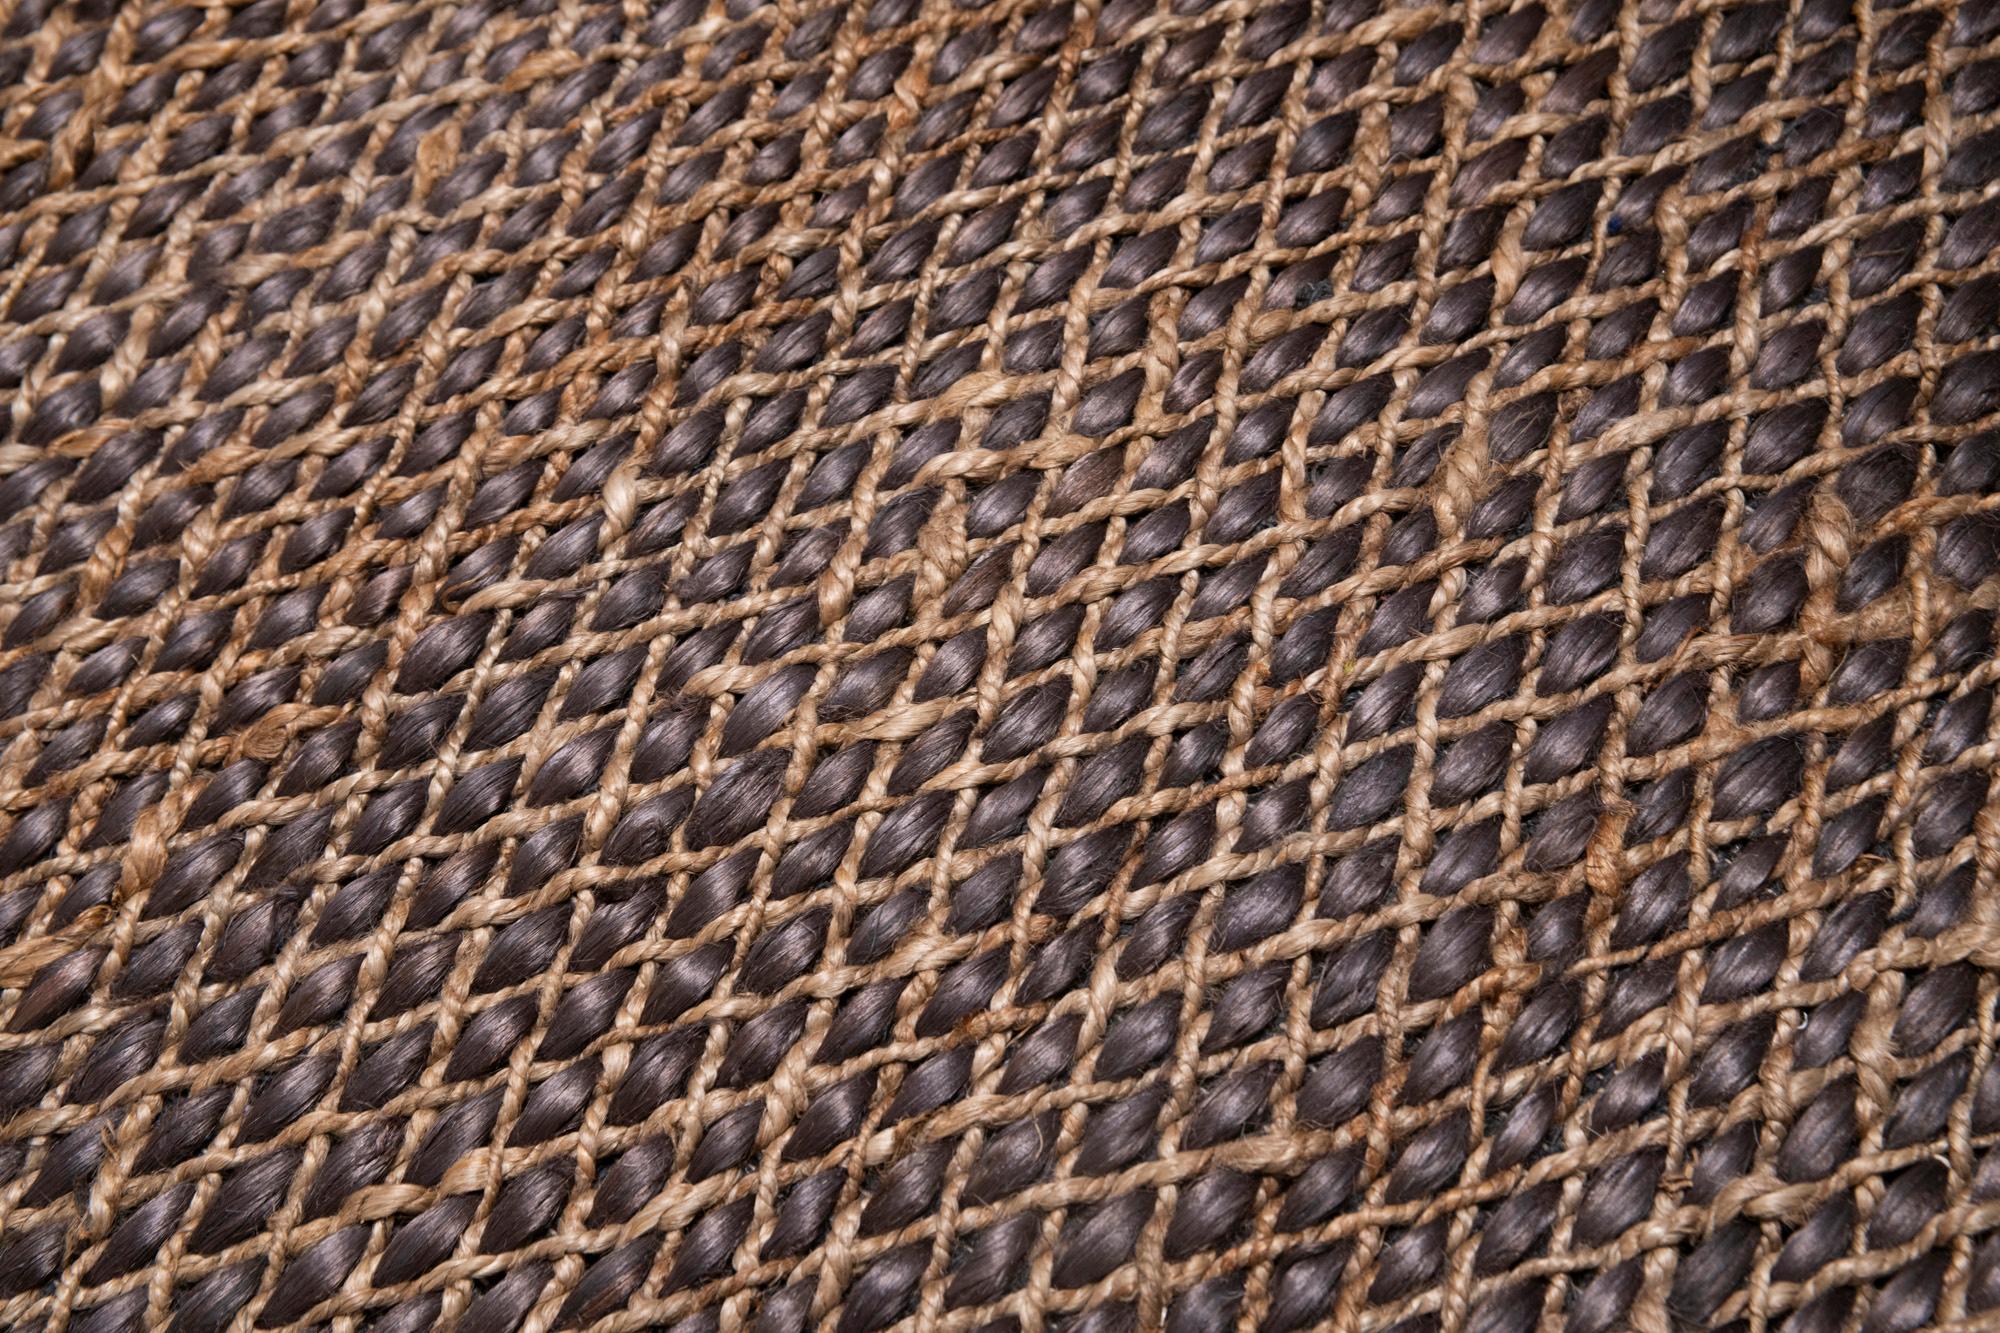 This jute rug has been ethically hand braided in the finest jute yarns by artisans in Northern India, using a traditional weaving technique of this area.
Each rug is handwoven with irregular details to create beautiful imperfections that make each